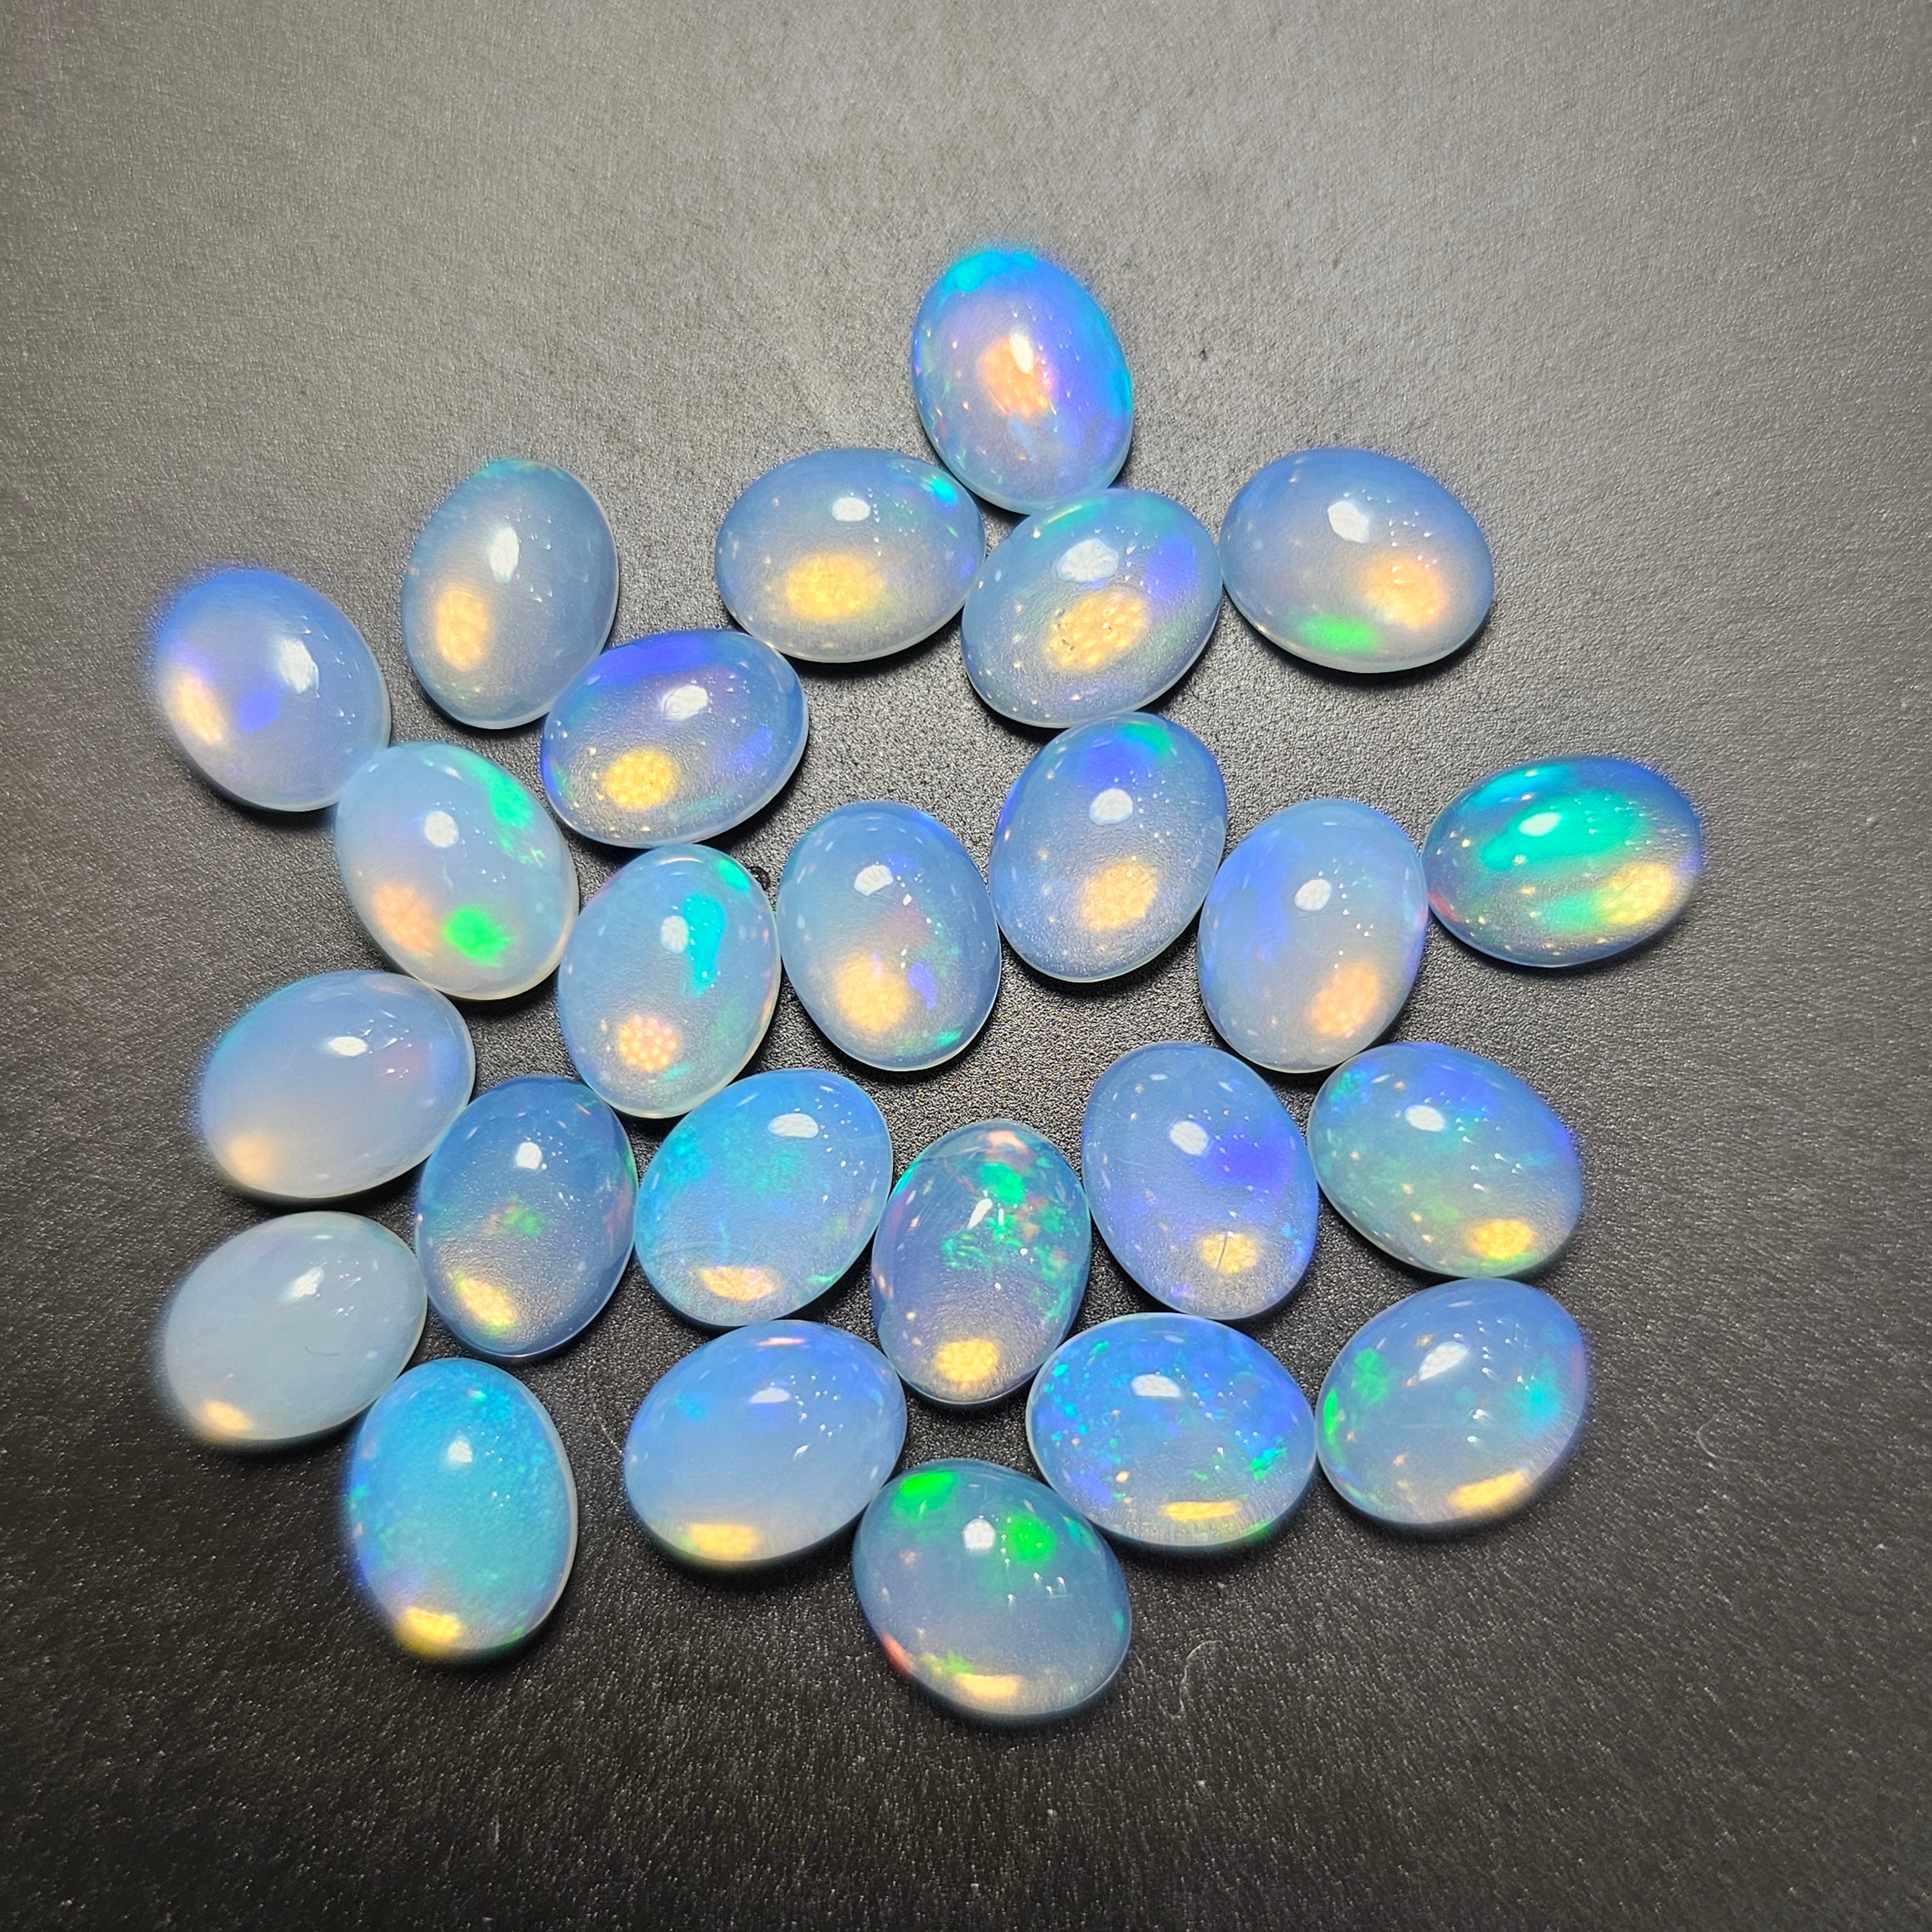 12 Pcs of Natural Blue Opals | Welo Mined Untreated 9mm - The LabradoriteKing